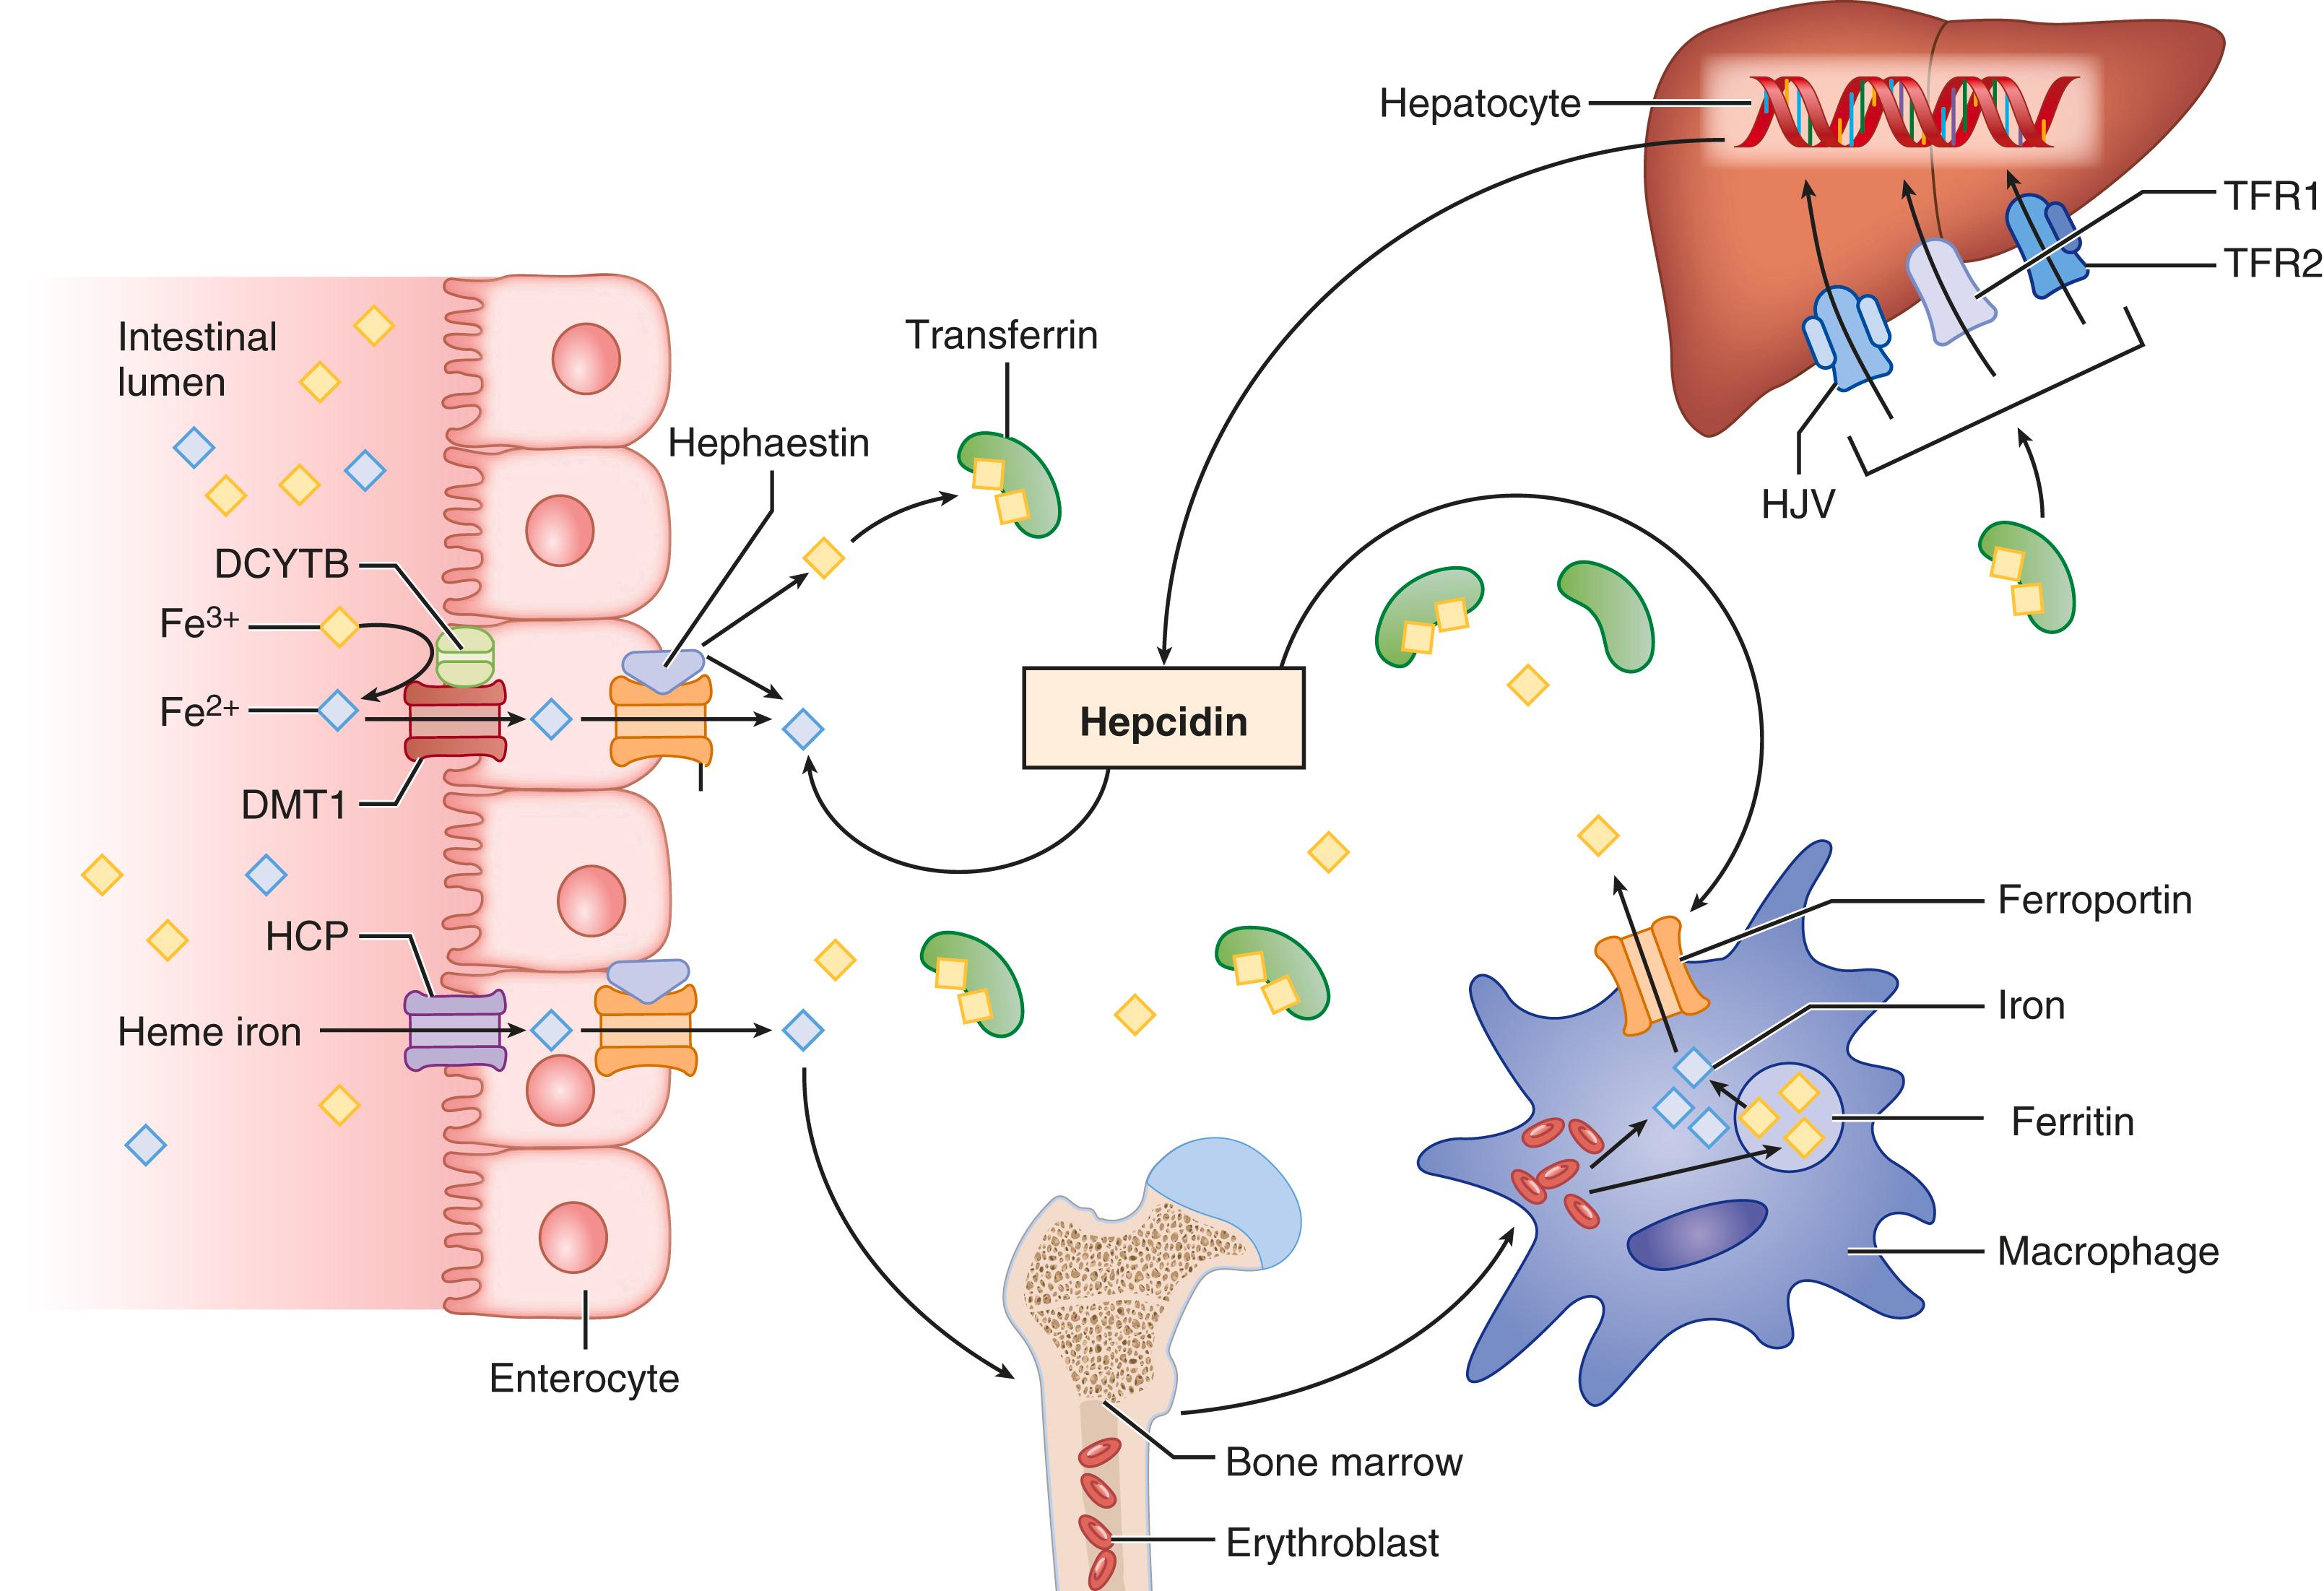 FIGURE 196-1, Hepcidin, the master regulator of iron absorption and secretion. Plasma iron levels are controlled primarily at the level of absorption by duodenal enterocytes and reticuloendothelial system (RES) macrophages. Heme-iron can also be directly absorbed from the gastrointestinal tract through a carrier protein, possibly heme carrier protein. Non-heme (inorganic) iron is absorbed via divalent metal transporter 1 after conversion from ferric (Fe 3+) to ferrous (Fe 2+) iron through duodenal cytochrome b–related ferric reductase. RES macrophages acquire iron through erythrophagocytosis. Efflux of iron from both enterocytes and RES macrophages occurs through the iron export protein ferroportin. Fe 2+ is reduced back to ferric iron (Fe 3+) through hephaestin before being transported out of the enterocyte. Iron is bound to transferrin as it enters the plasma and then travels through the circulation, where it is taken up by various organs and used in the development of erythrocytes and other biologic processes. The principal regulator of iron levels is the hormone hepcidin, which is produced by hepatocytes. As iron stores increase, hepcidin inhibits iron efflux from both duodenum enterocytes and RES macrophages through downregulation of ferroportin. Serum iron levels influence hepcidin expression through the interaction of the HFE protein with TFR1/TFR2 along with BMP6 and HJV. BMP = bone morphogenic protein; DCYTB = duodenal cytochrome b–related ferric reductase; DMT1 = divalent metal transporter 1; HCP = heme carrier protein; HJV = hemojuvelin; TFR1 = transferrin receptor 1; TFR2= transferrin receptor 2.